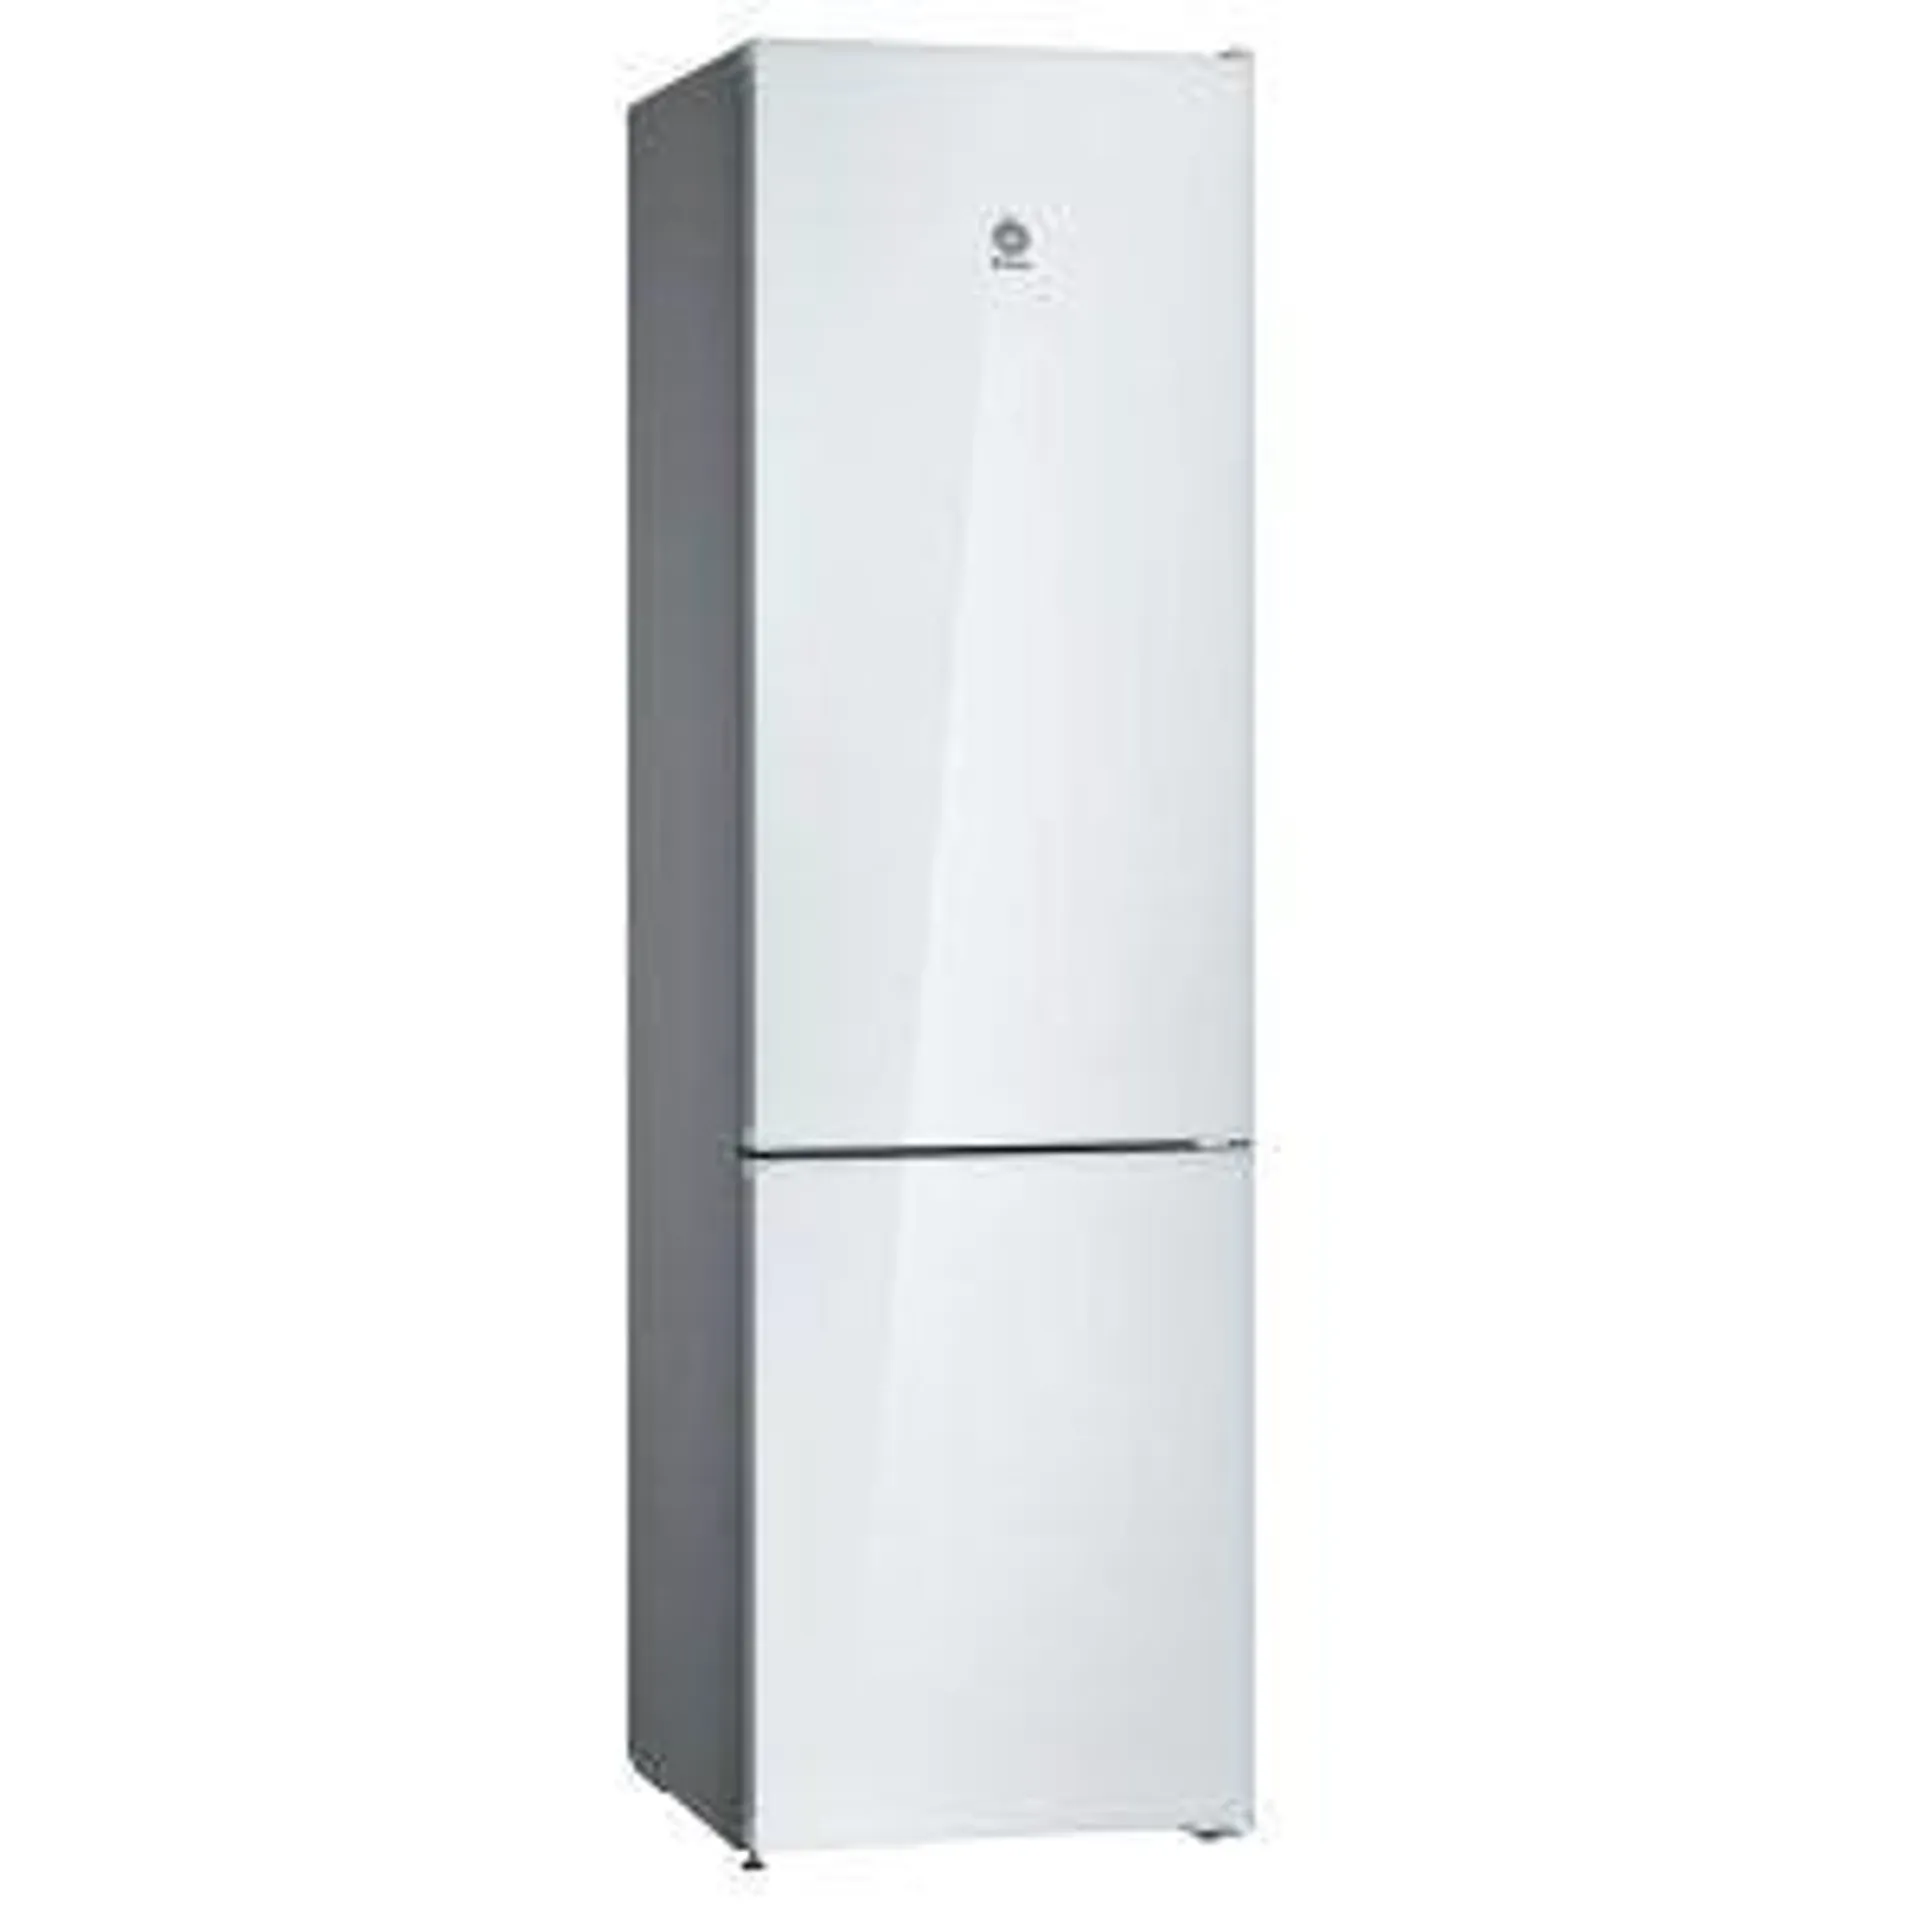 COMBI BLANCO EMC-1850AW EAS ELECTRIC F 185×60 NO FROST